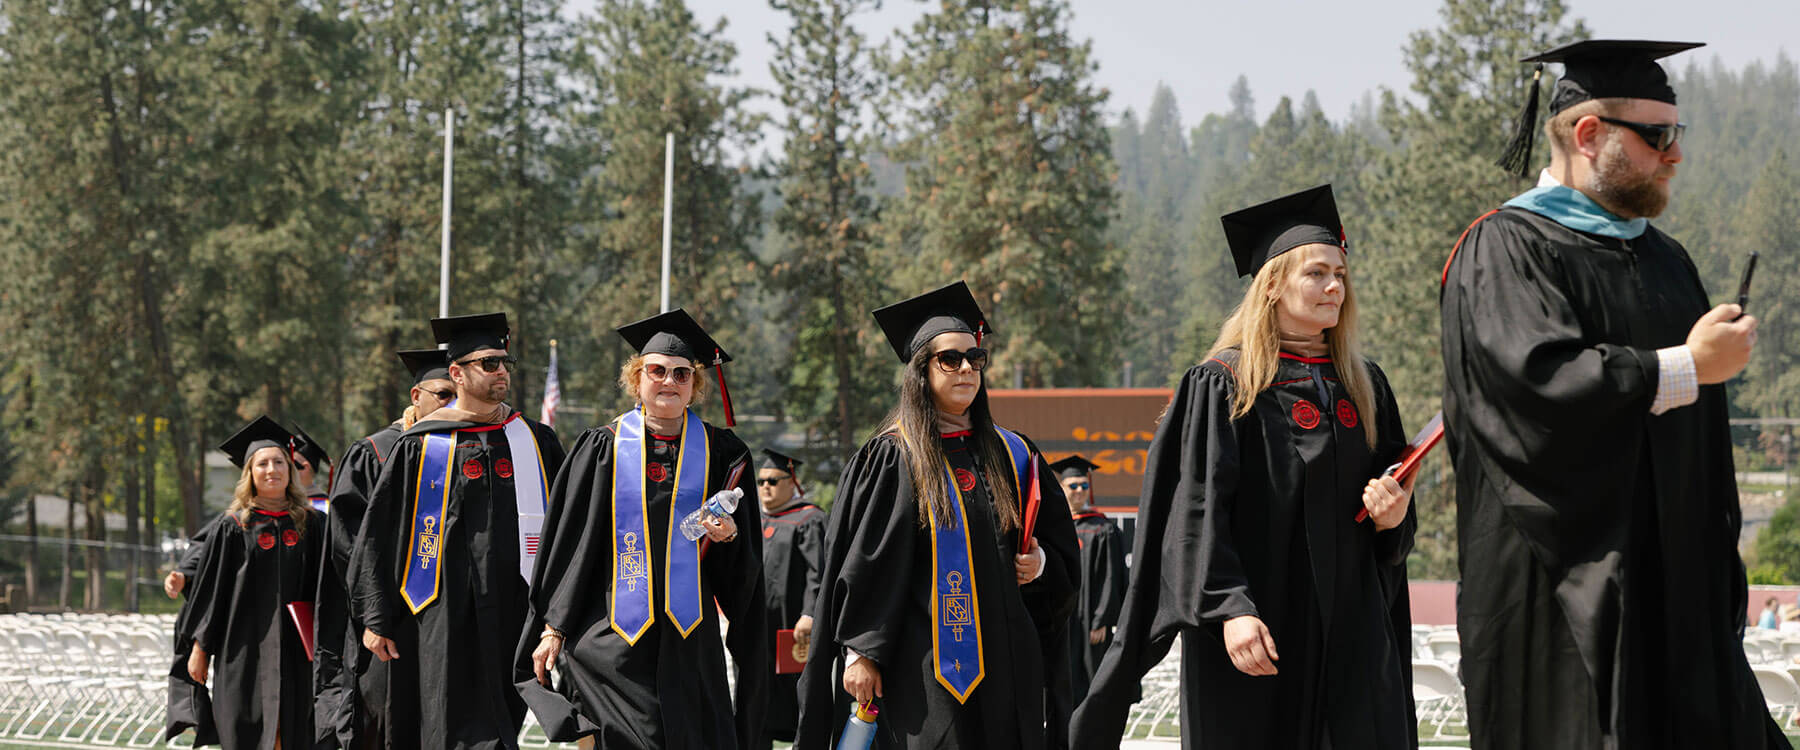 Students walking proudly with caps and gowns